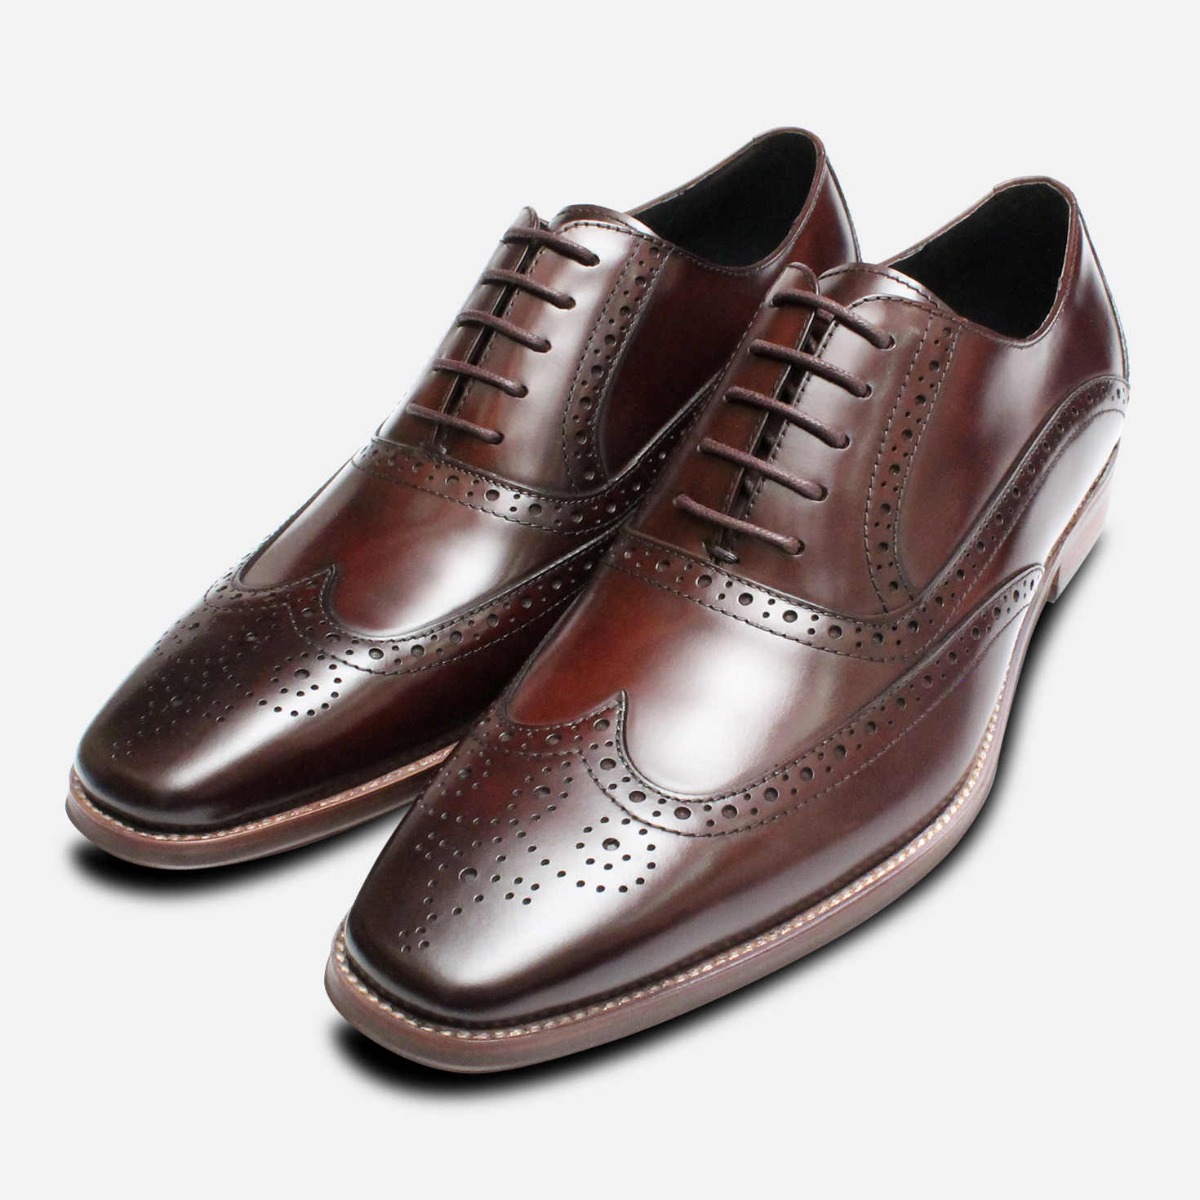 Premium Oxford Brogues in Brown Polished by John White | eBay